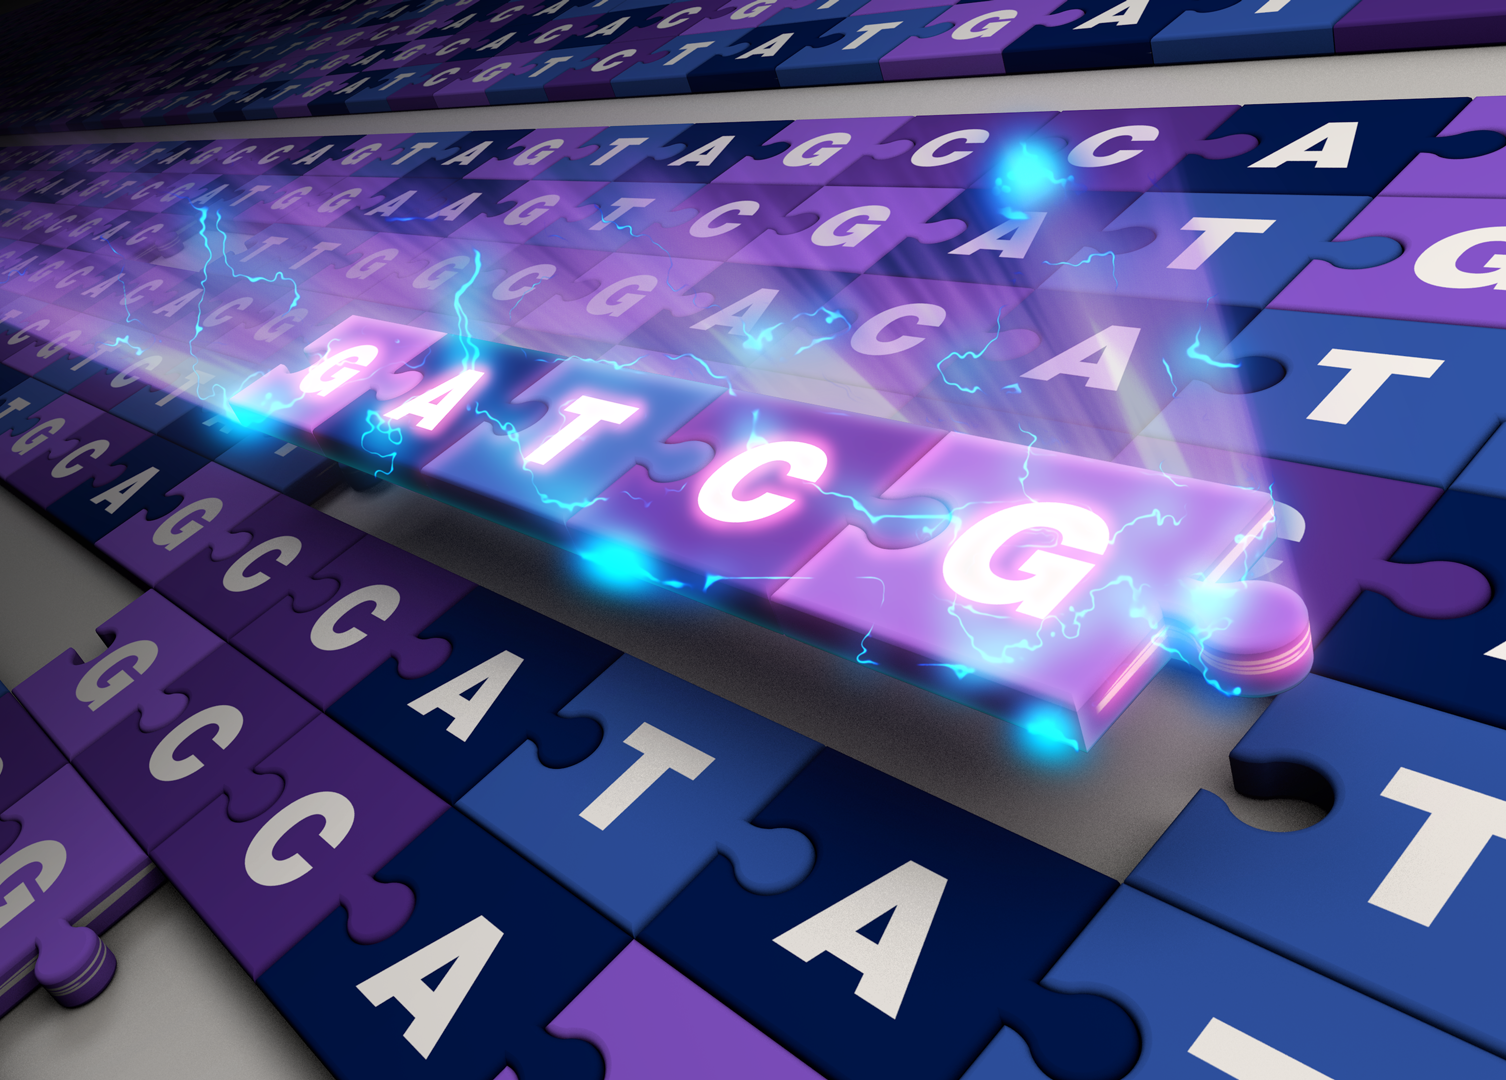 NIH software assembles complete genome sequences on-demand